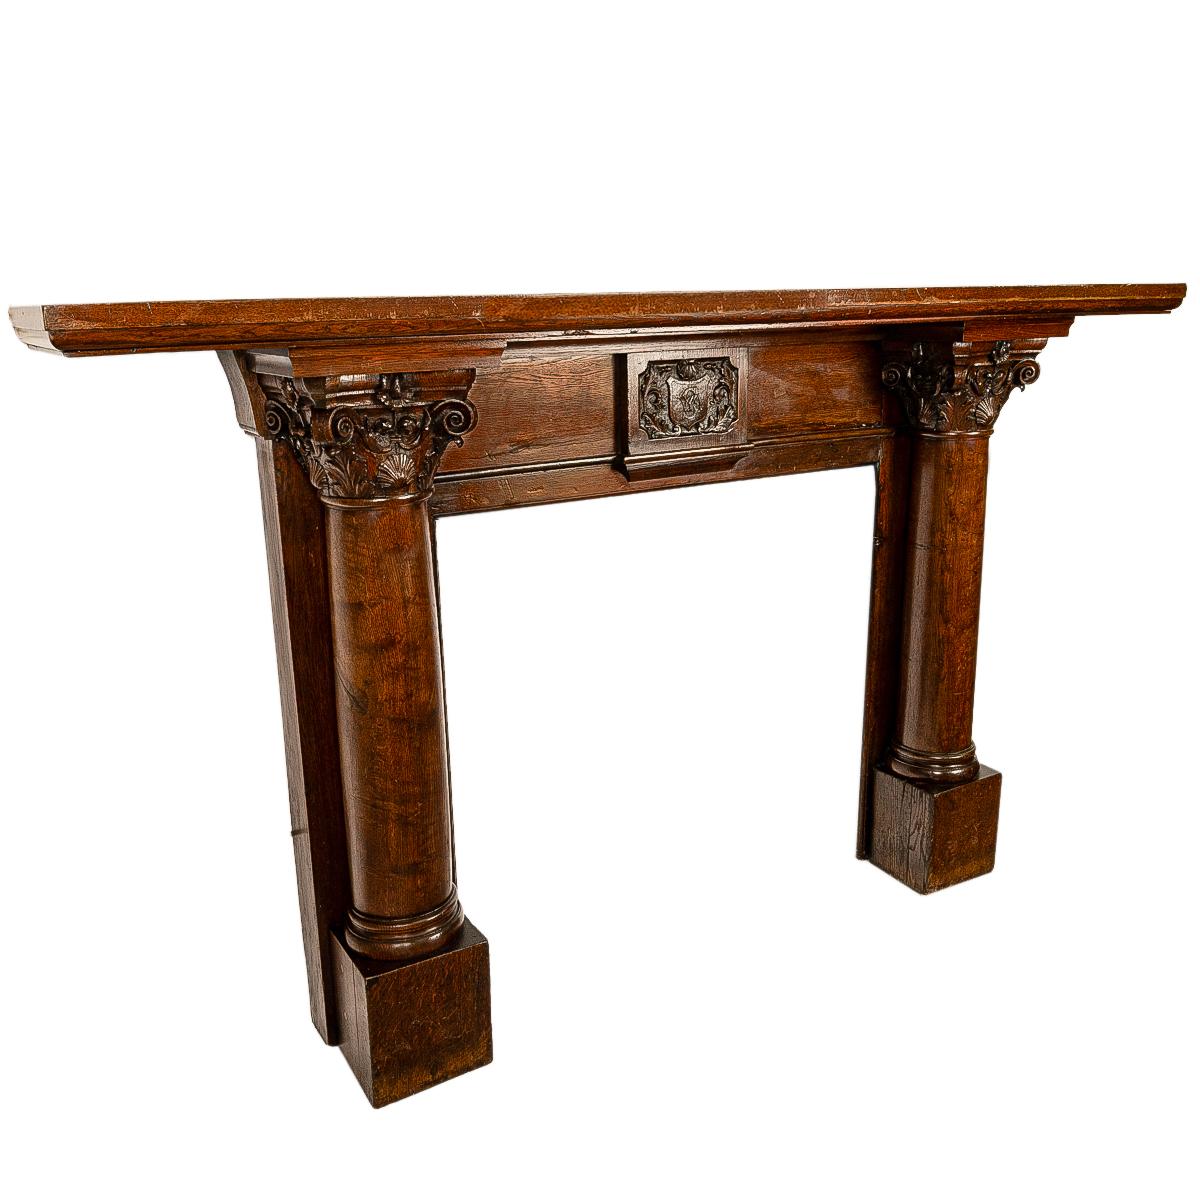 A magnificent and monumental antique American carved oak fireplace mantel, San Francisco, circa 1880.
A fabulous high Victorian, Romanesque carved oak fireplace mantel, the large 8ft wide mantel with a single board thick oak mantle top. Below is a